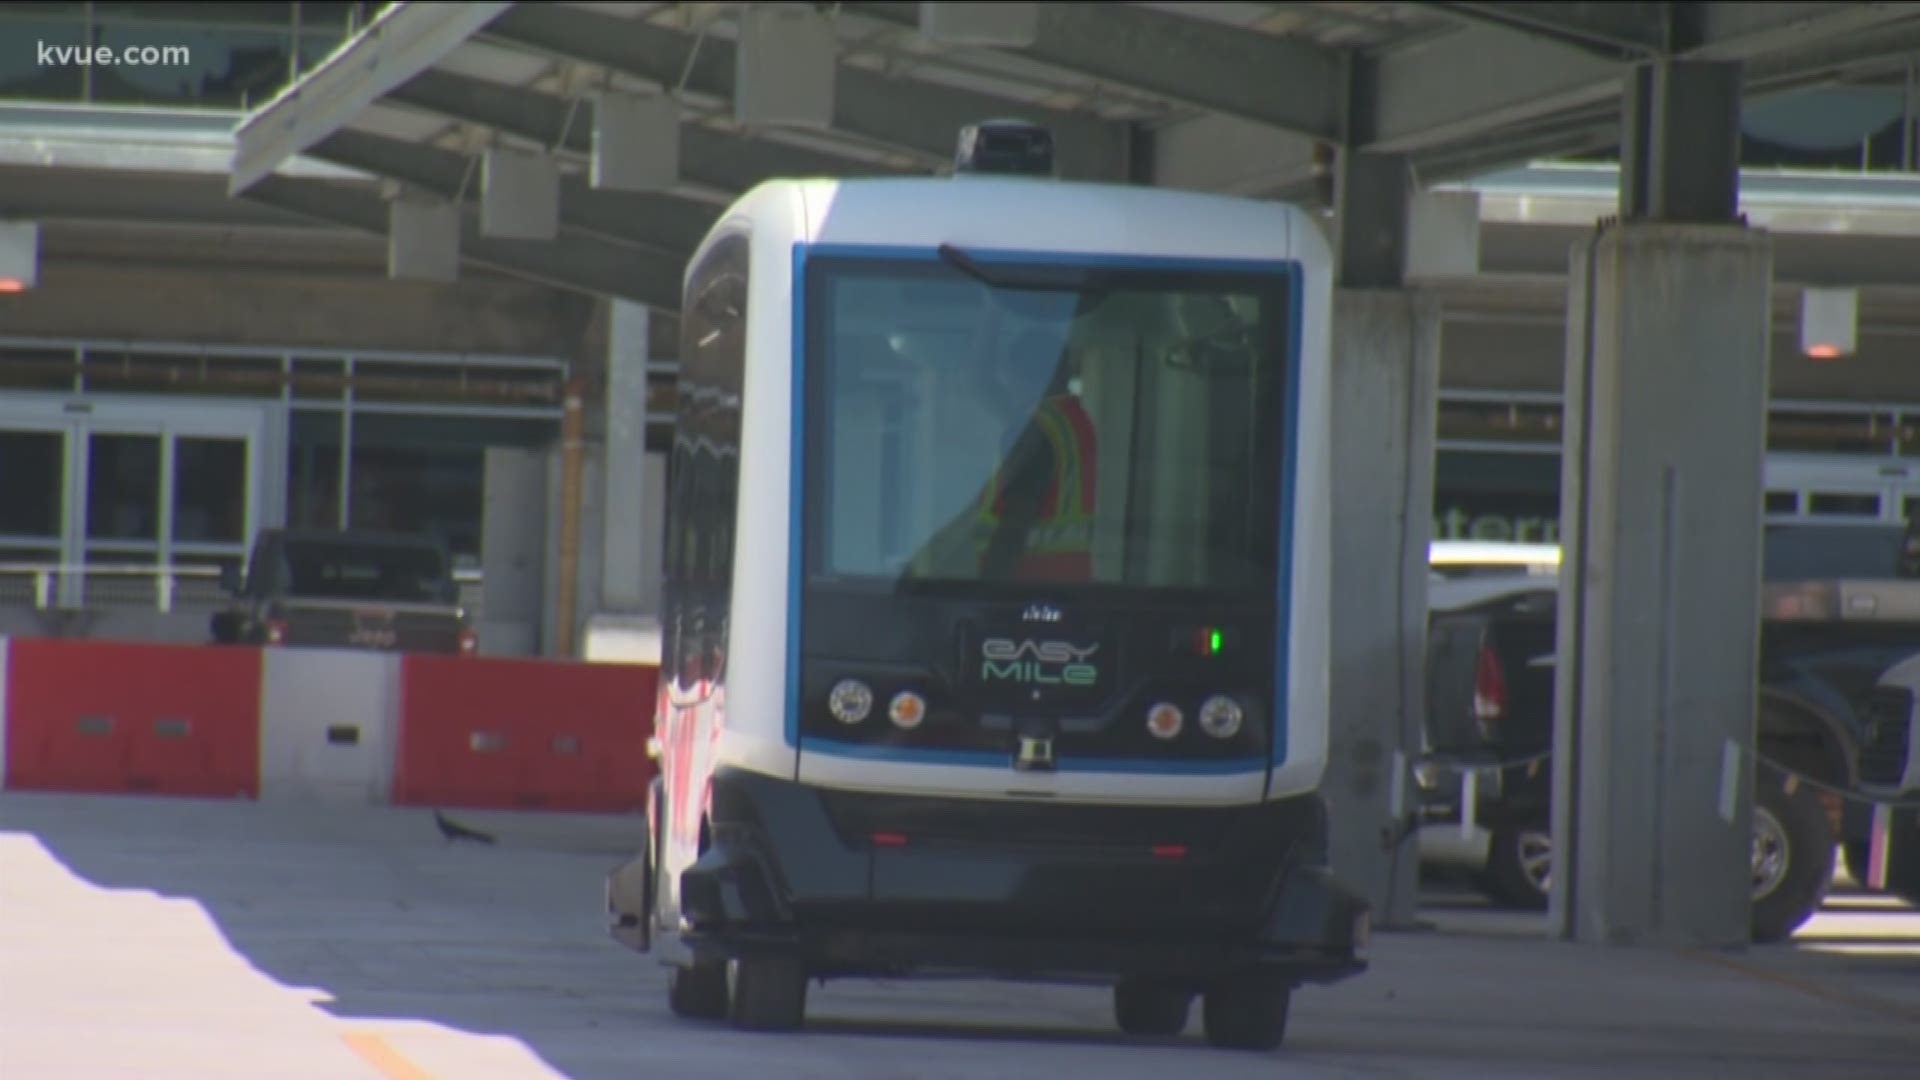 Whether you trust them or not, self-driving cars are becoming more and more common. And now the Austin-Bergstrom International Airport is getting in on the trend.